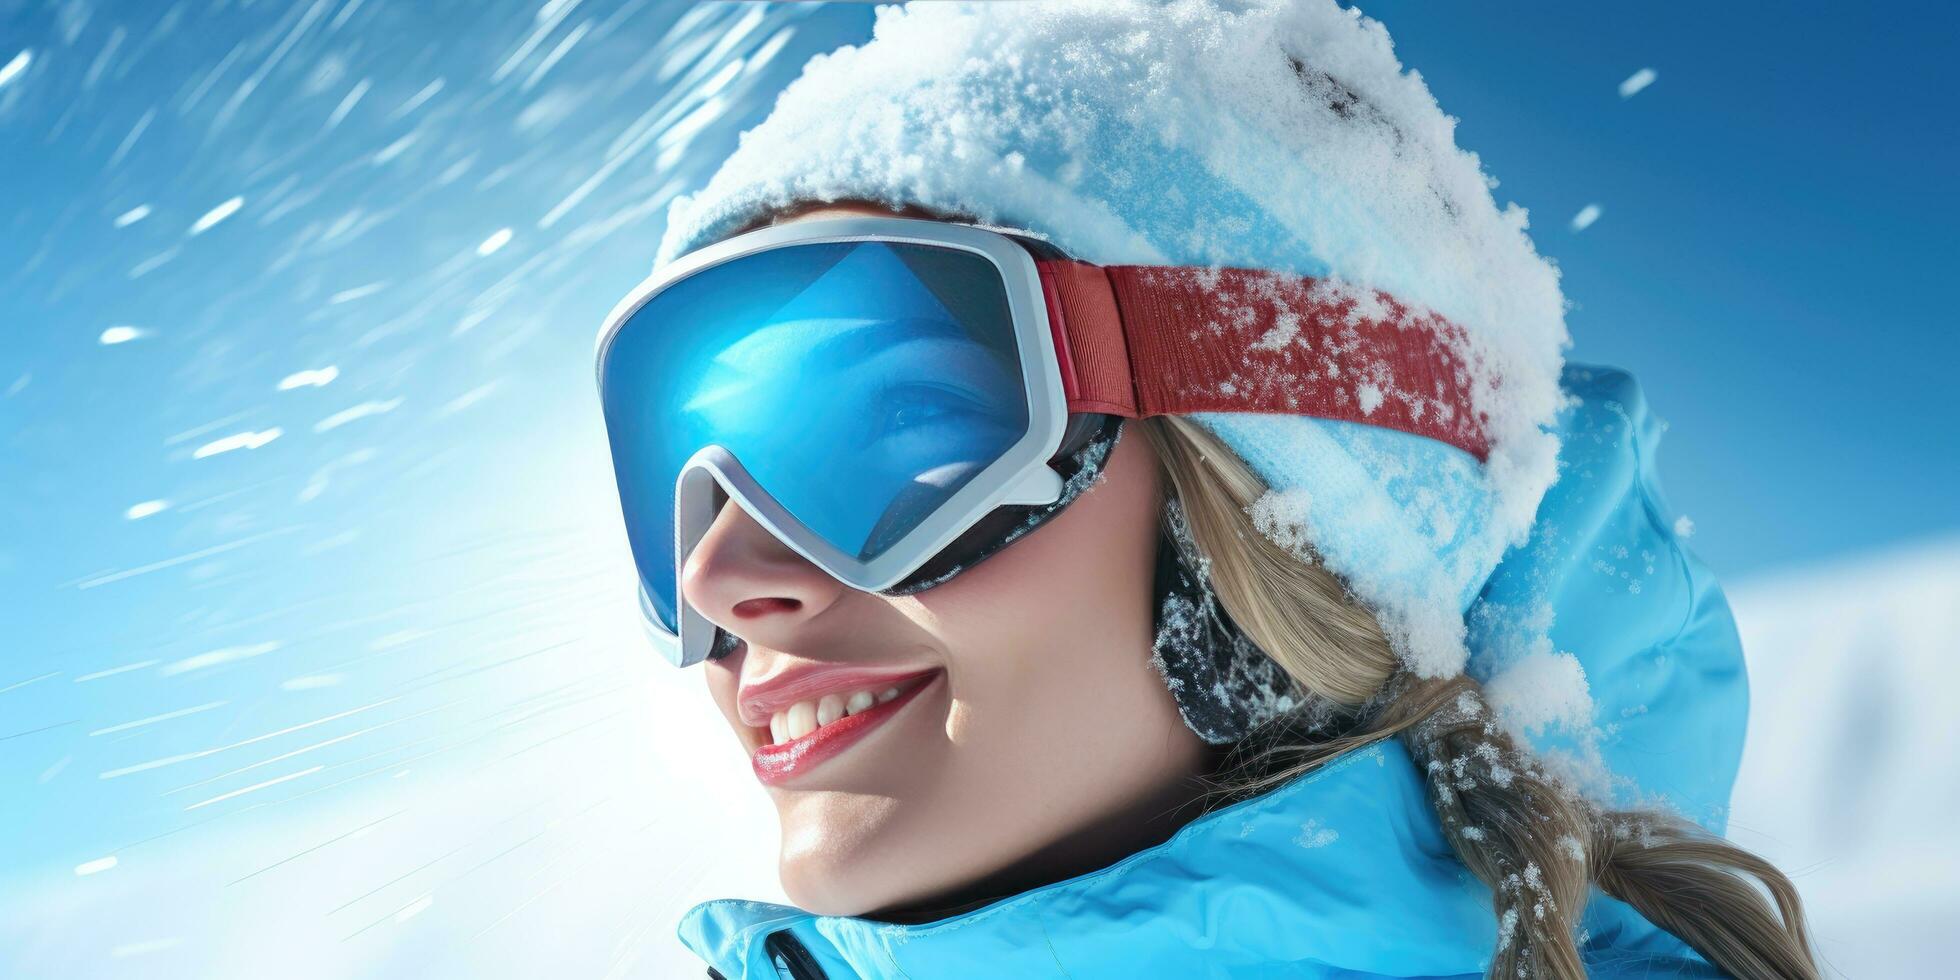 AI generated how to improve your skiing skills quickly and confidently photo